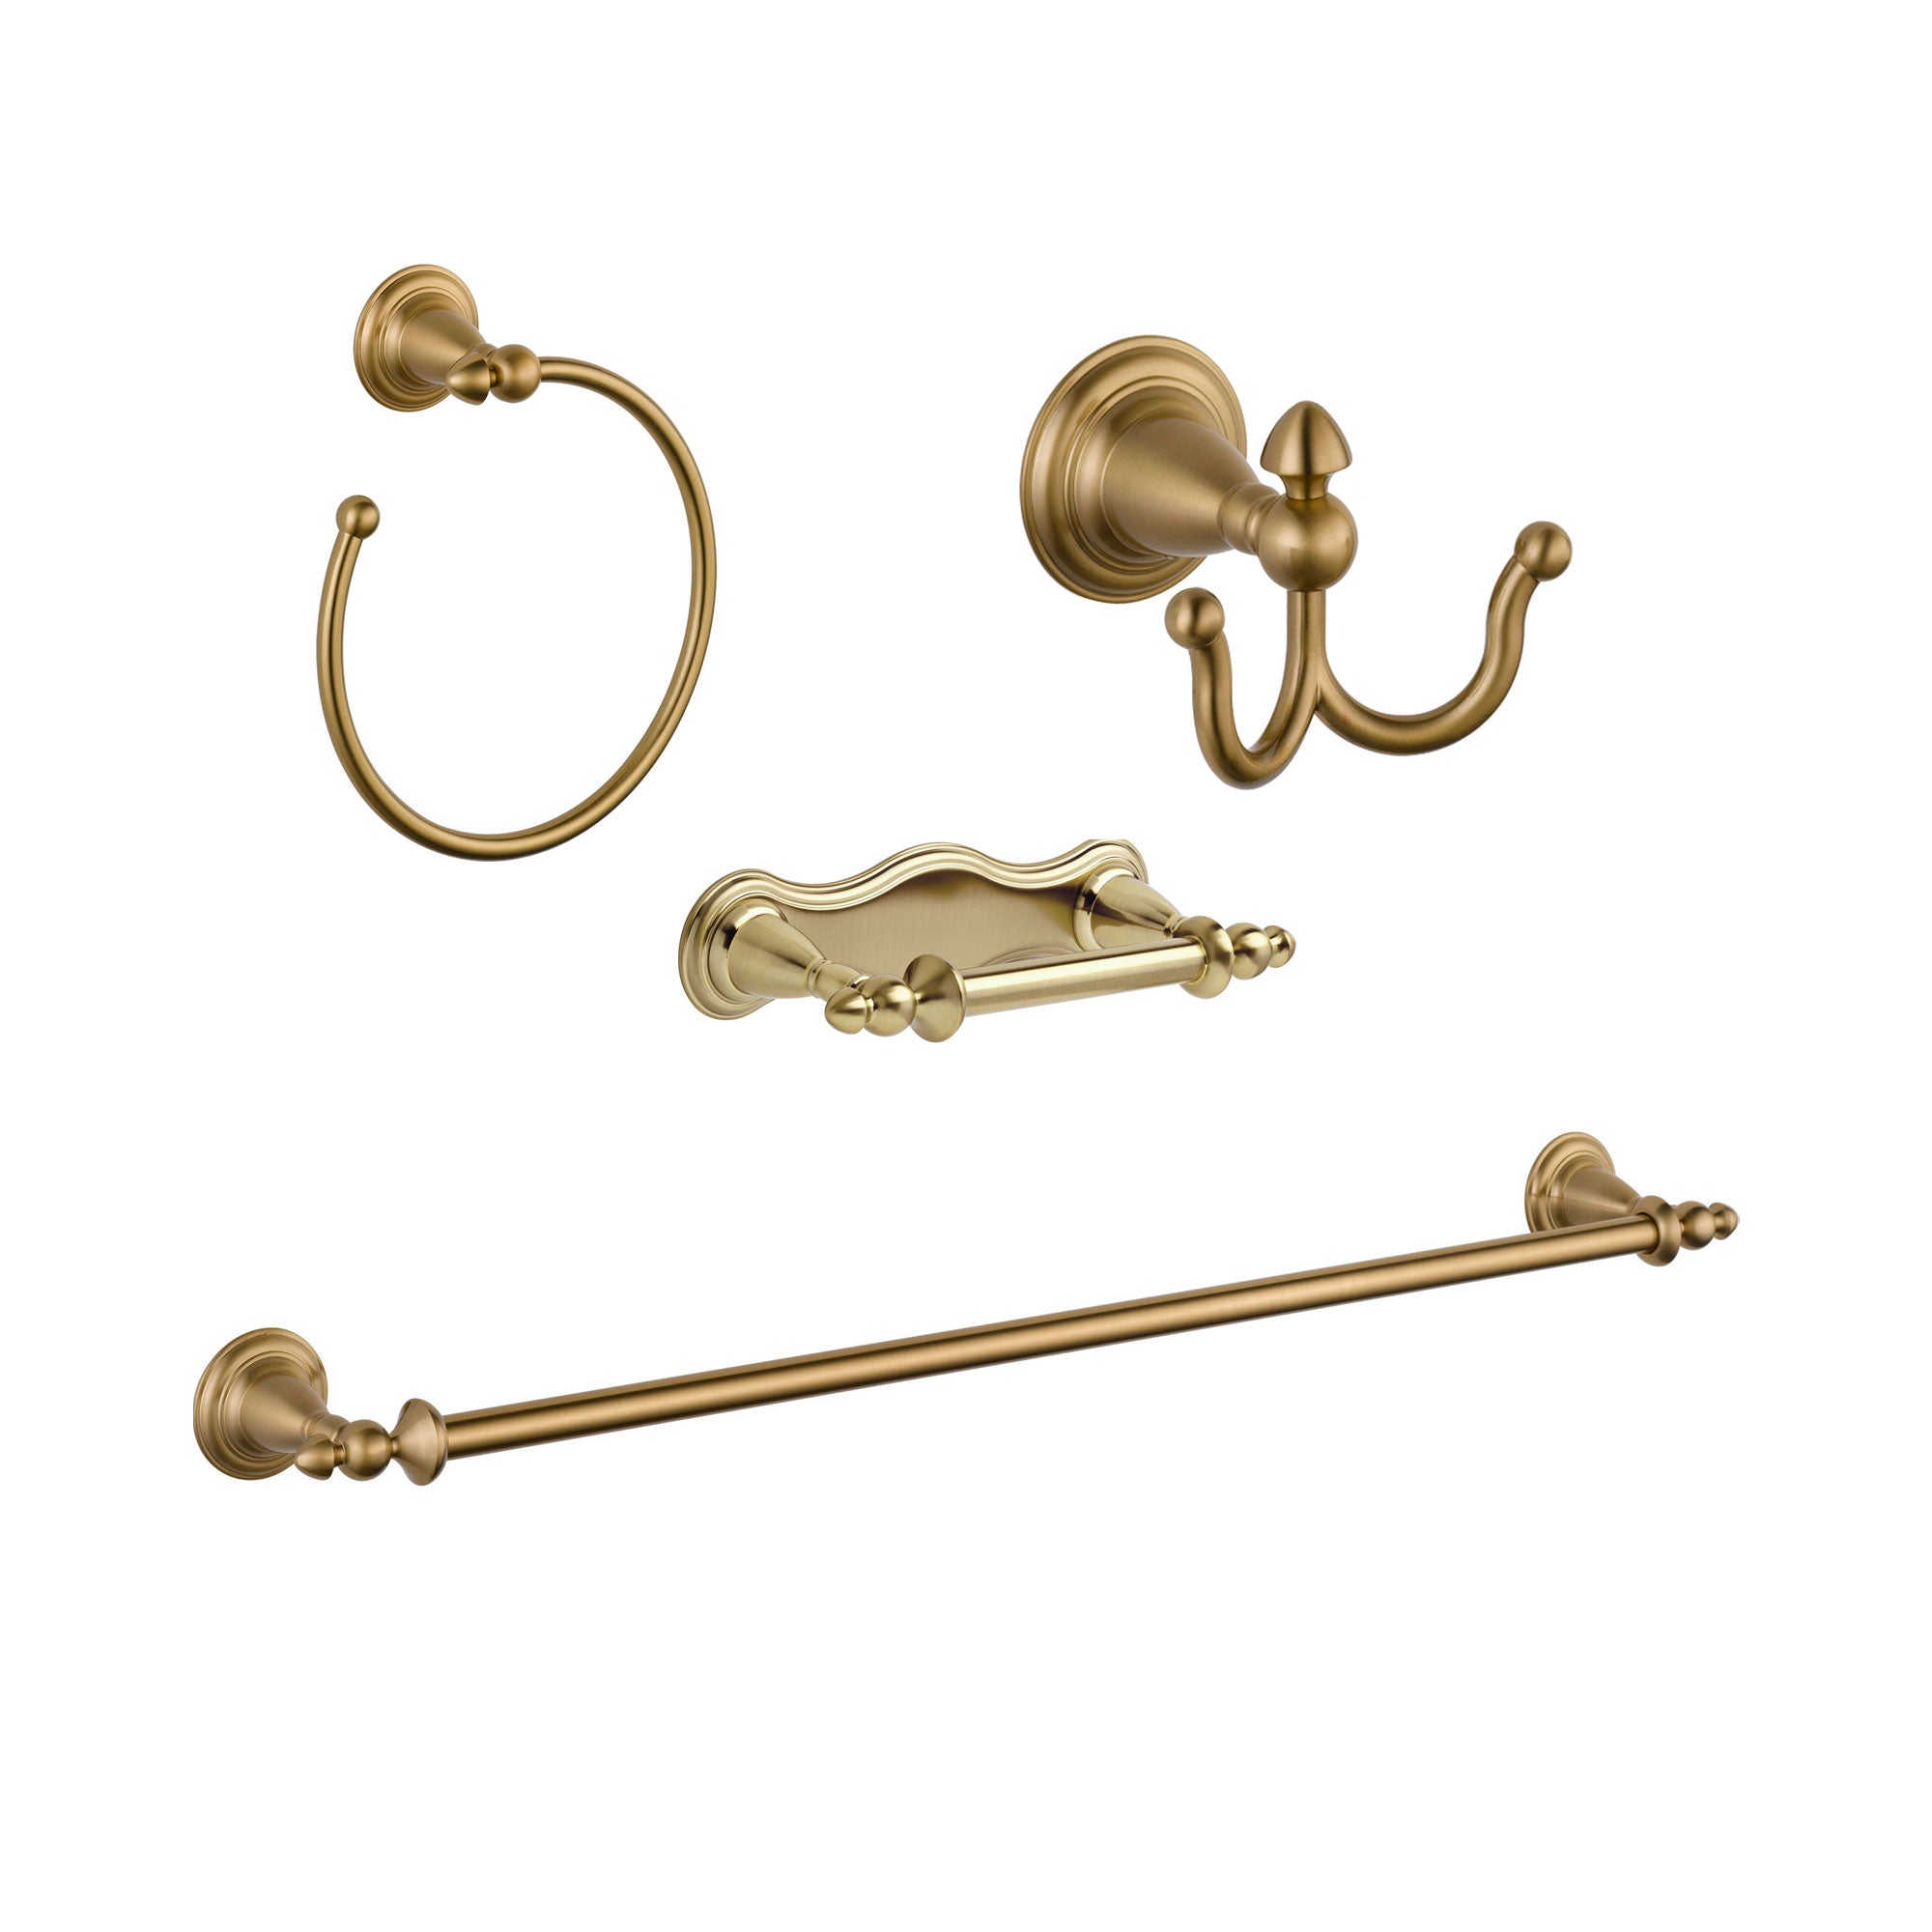 Delta Victorian Champagne Bronze STANDARD Bathroom Accessory Set Includes: 24" Towel Bar, Toilet Paper Holder, Robe Hook, and Towel Ring D10092AP